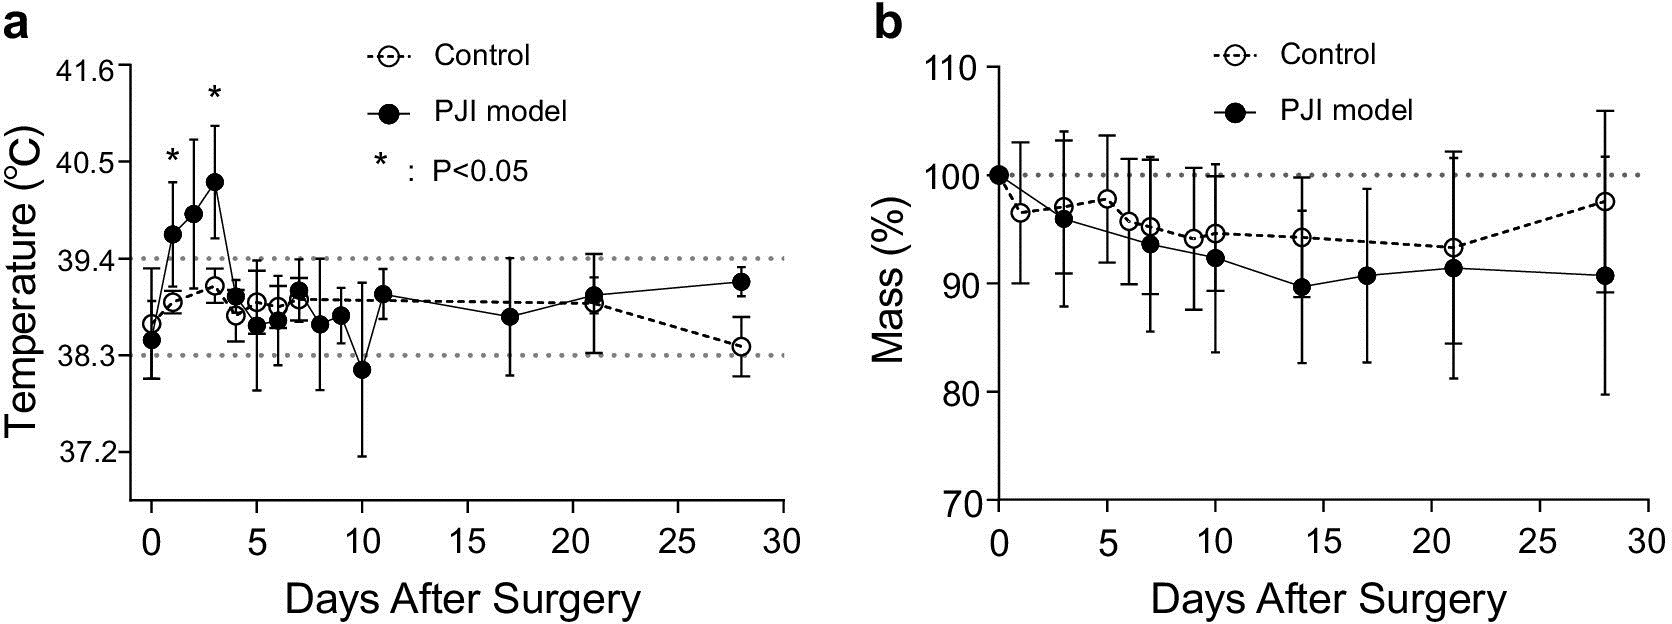 Fig. 1 
            Physiological markers of illness. a) Temperature and b) body mass of rabbits in the two groups of rabbits after surgery (n = 5/group). *p < 0.05 versus control aseptic group, paired t-test. PJI, periprosthetic joint infection.
          